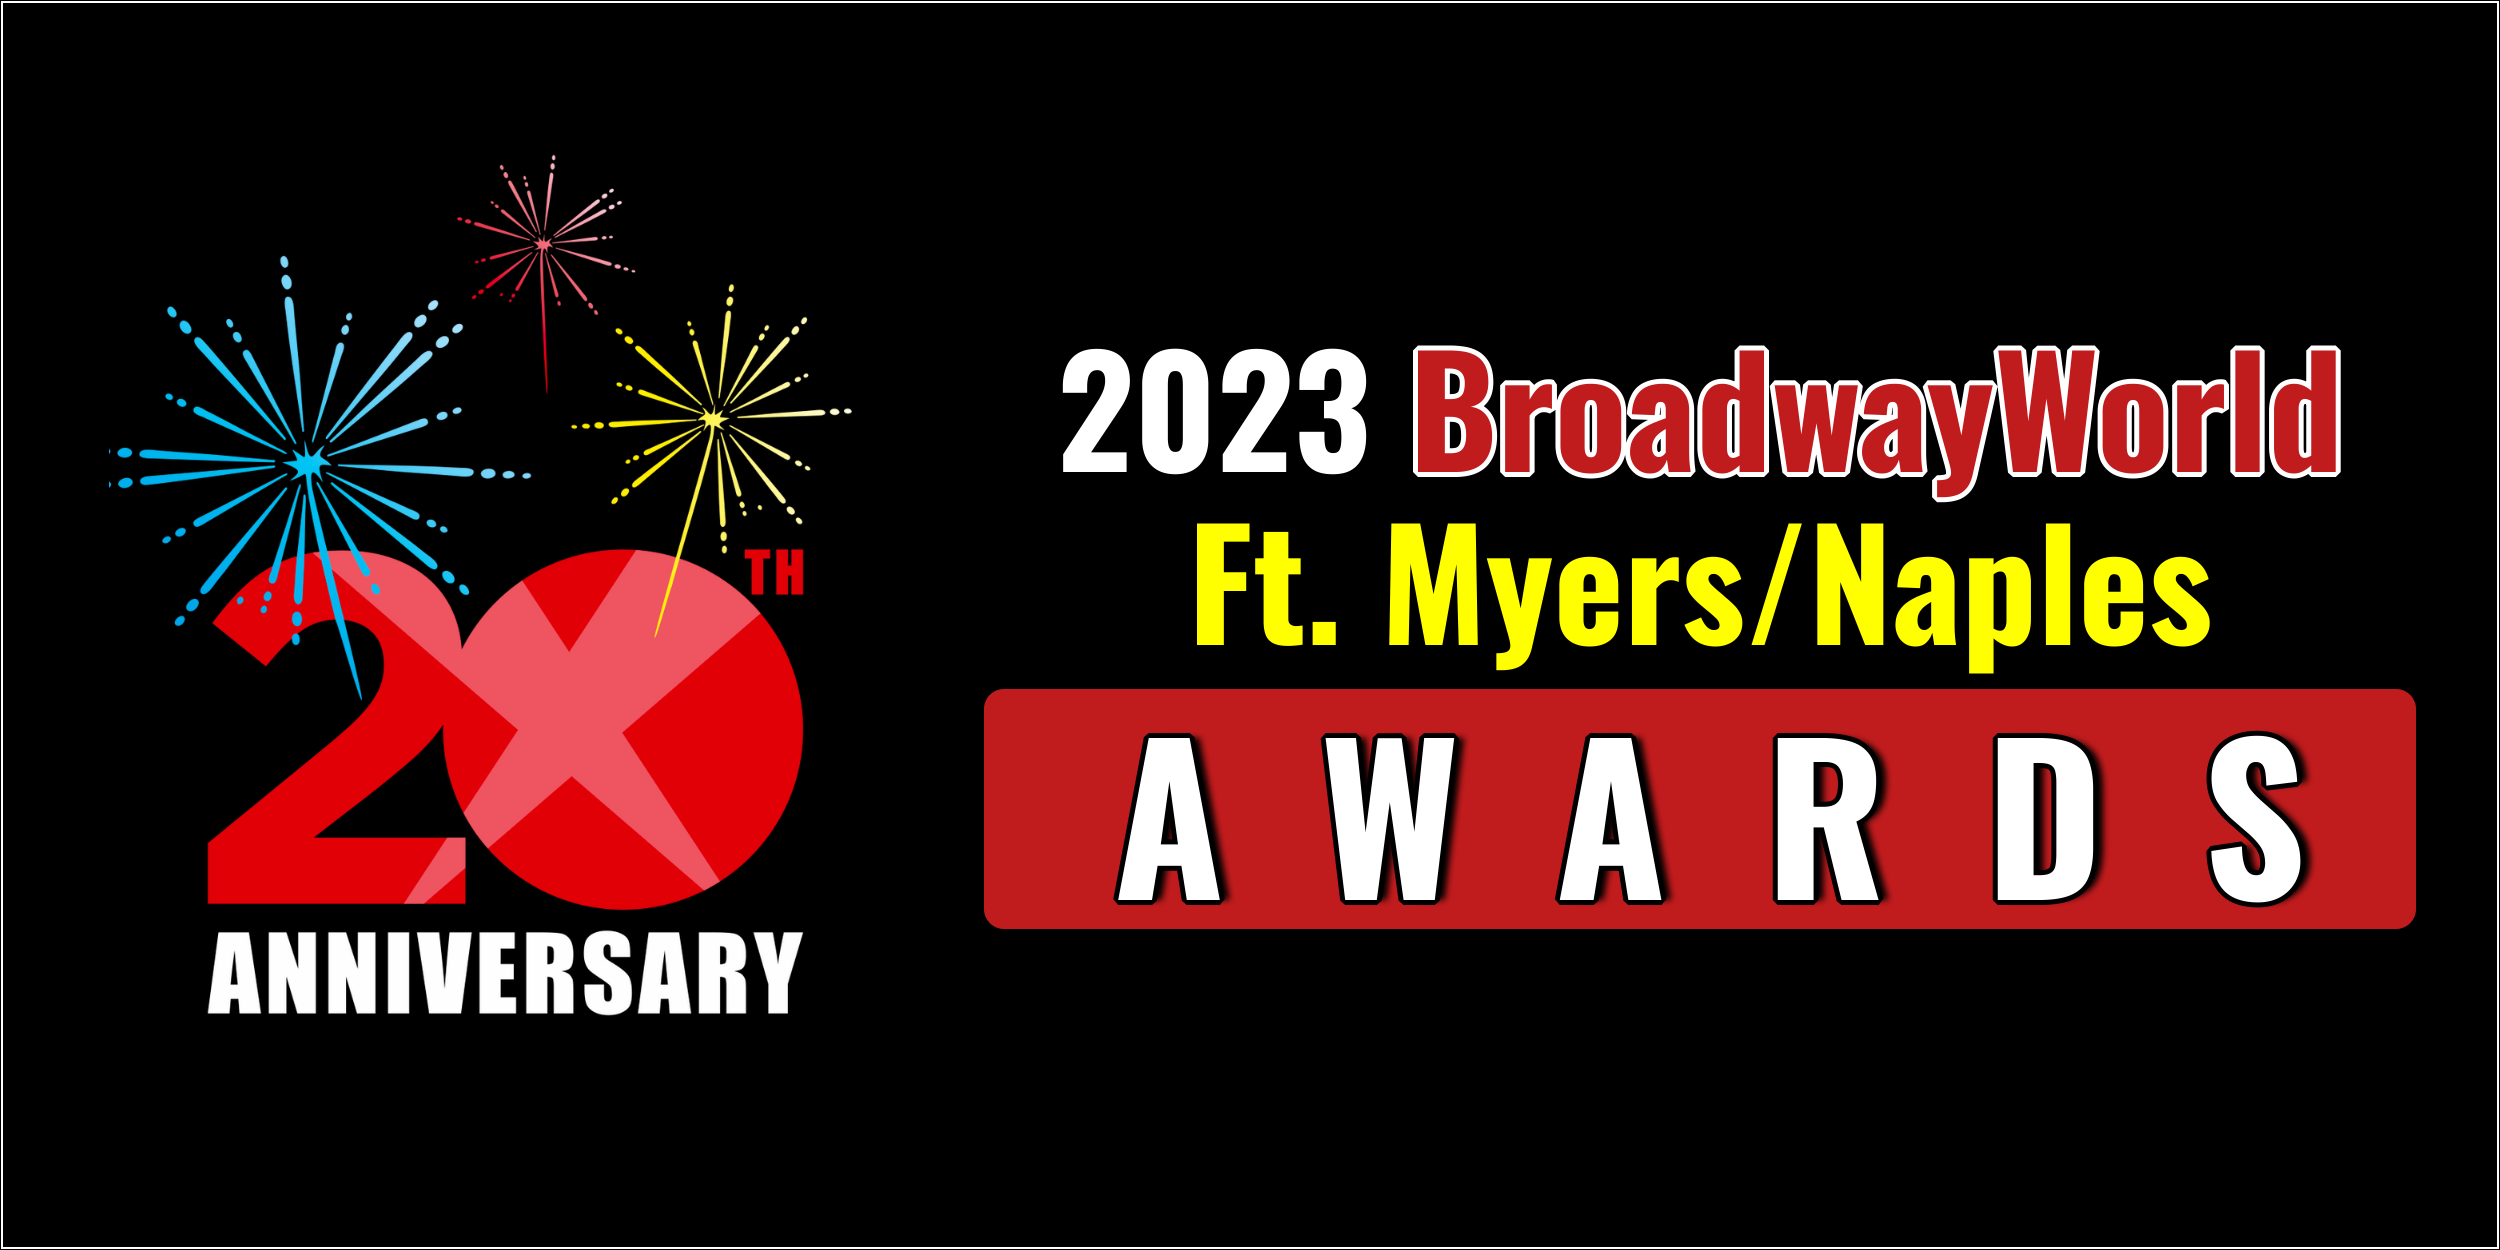 Latest Standings Announced For The 2023 BroadwayWorld Ft. Myers/Naples Awards; BULLETPROOF BACKPACK Leads Best Play! 